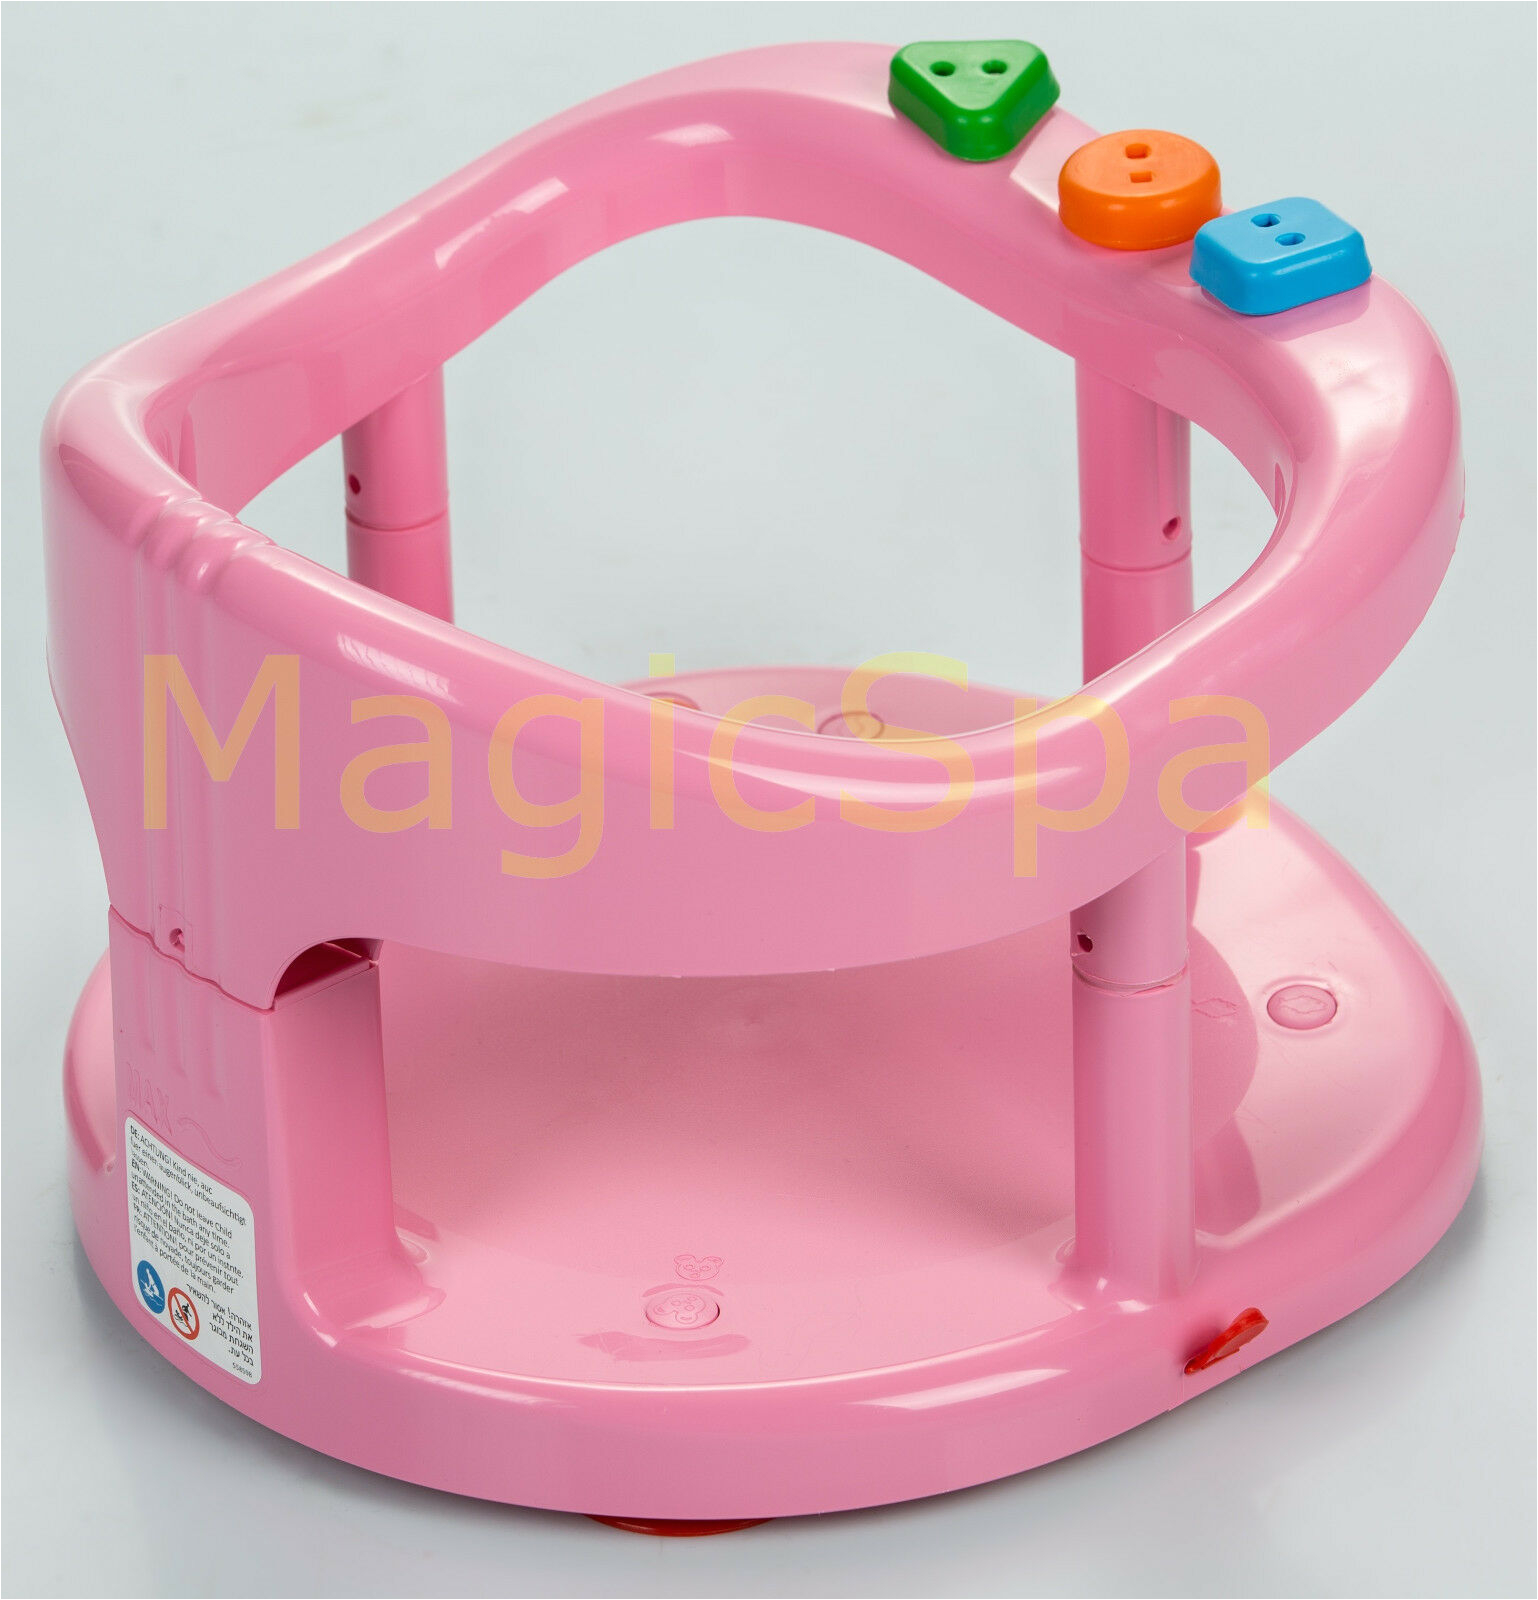 Baby Seats for Bath Tub Infant Baby Bath Tub Ring Seat Keter Pink Fast Shipping